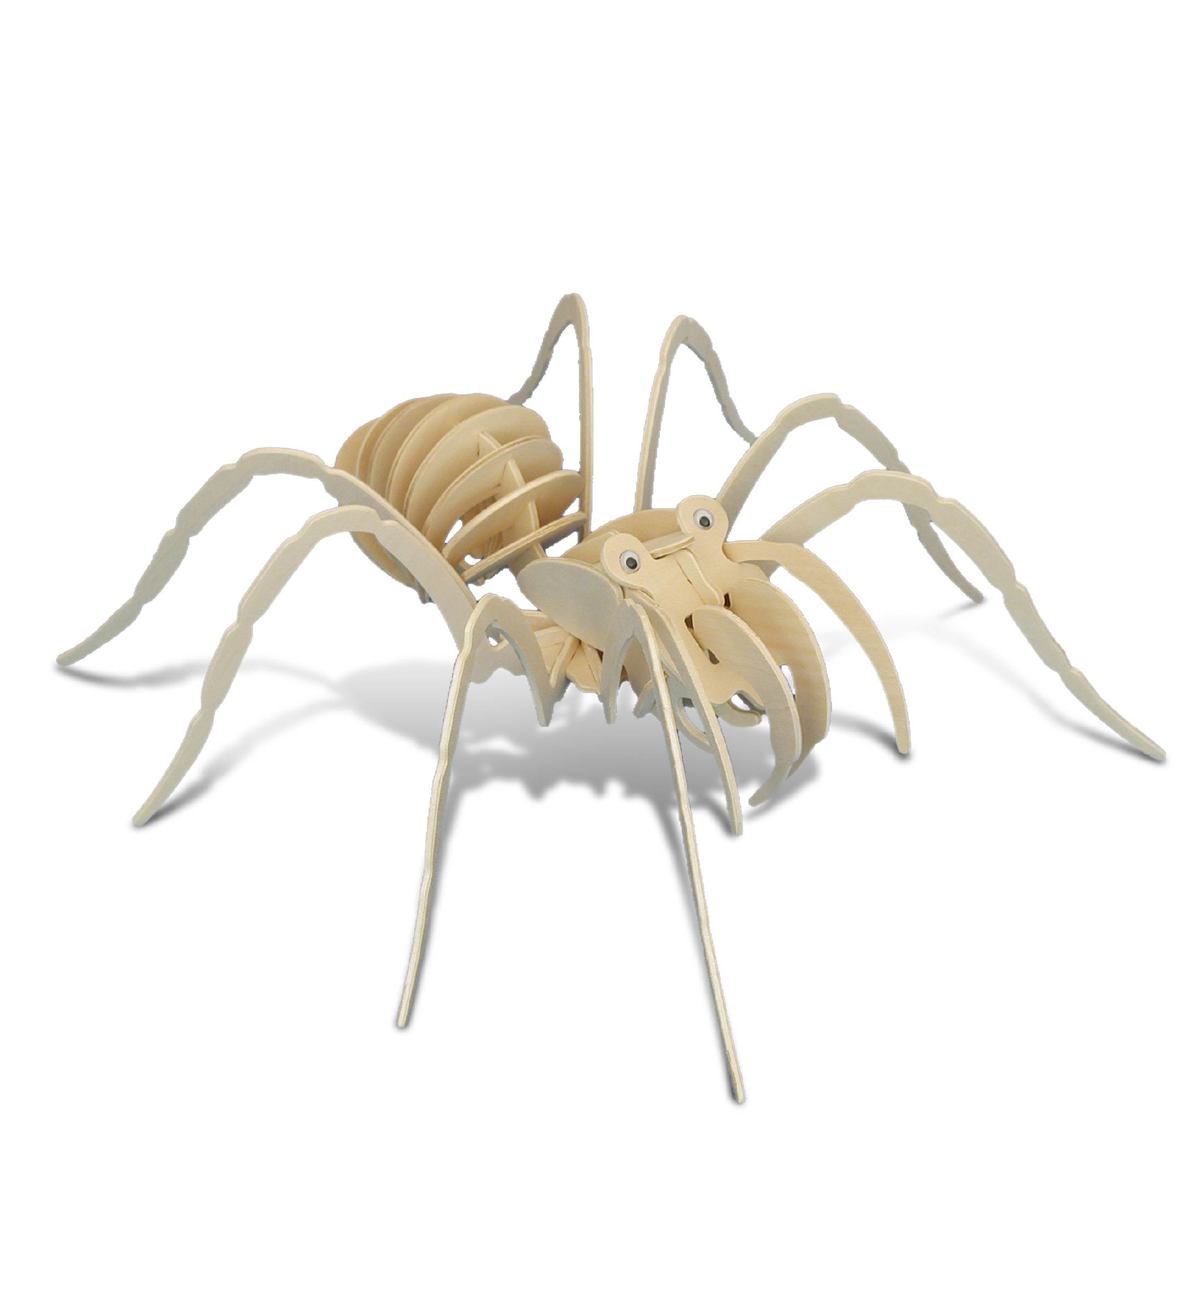 3D PRE-COLORED WOOD PUZZLE "TARANTULA" BY PUZZLED 